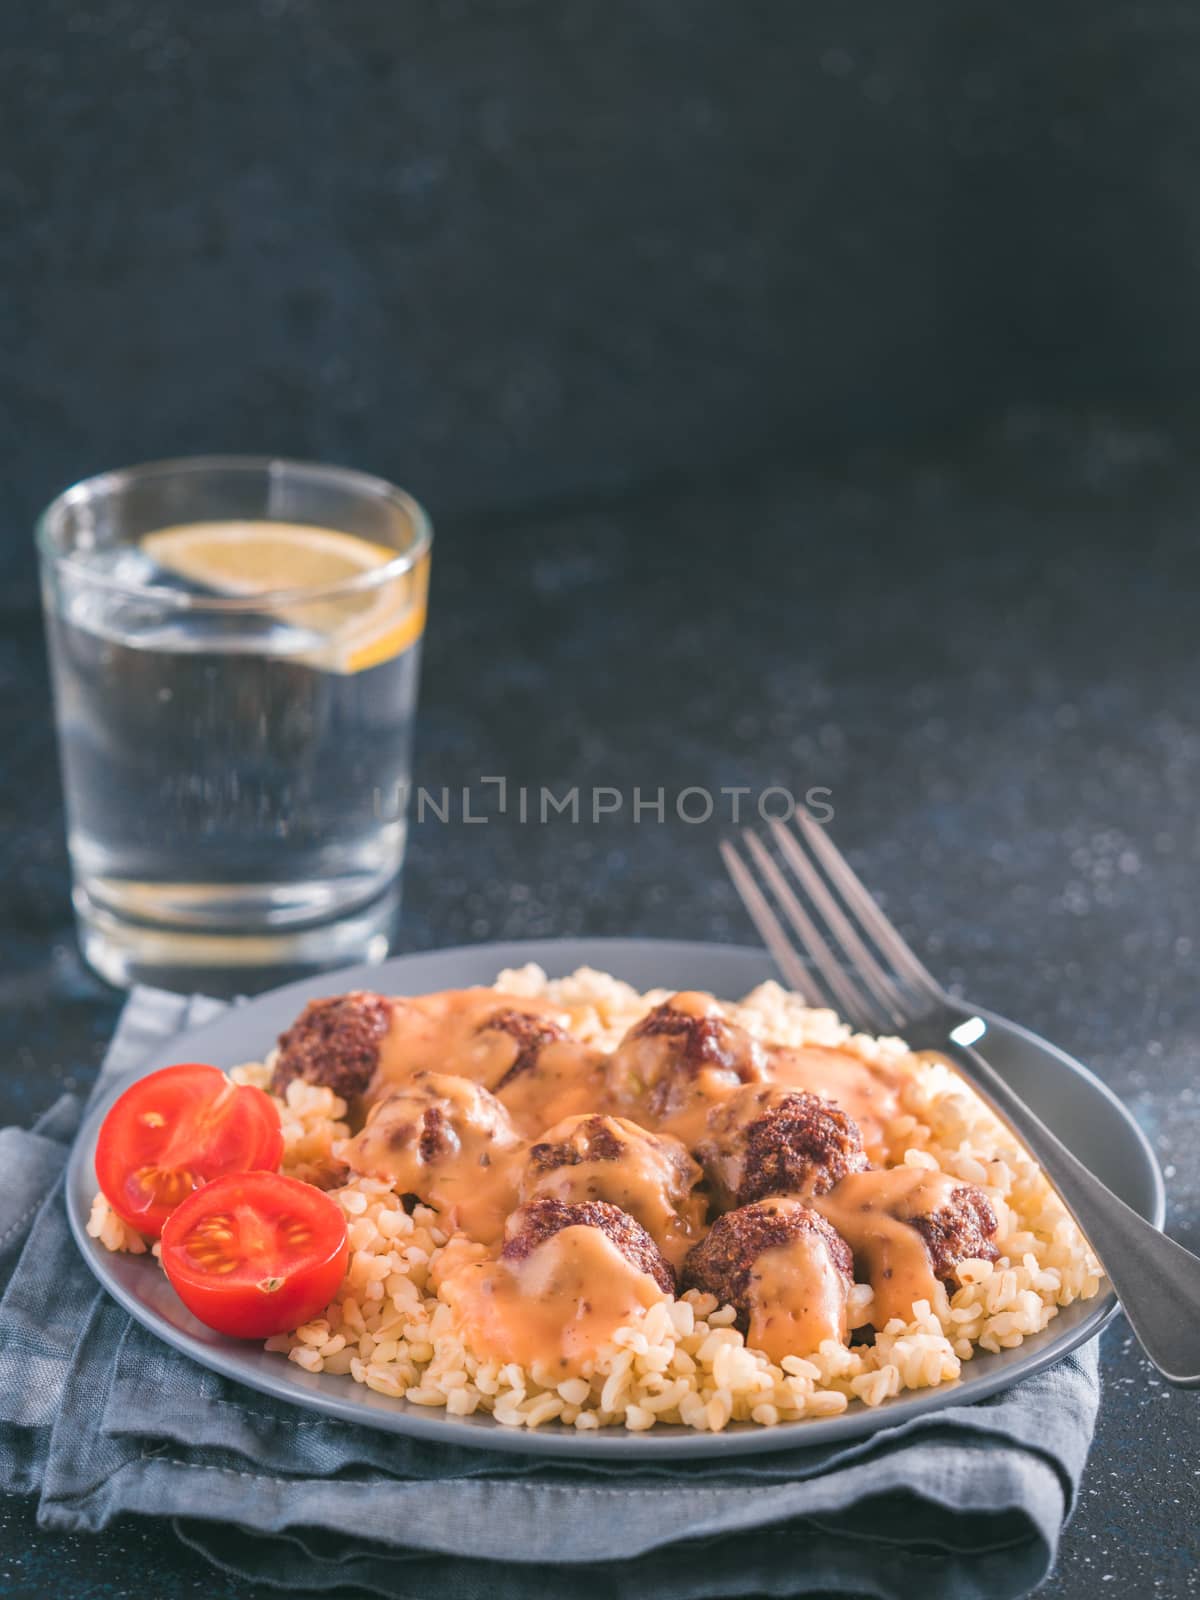 Bulgur dish idea and recipe. Bulgur with homemade roasted beef meatballs on dark blue background. Copy space for text